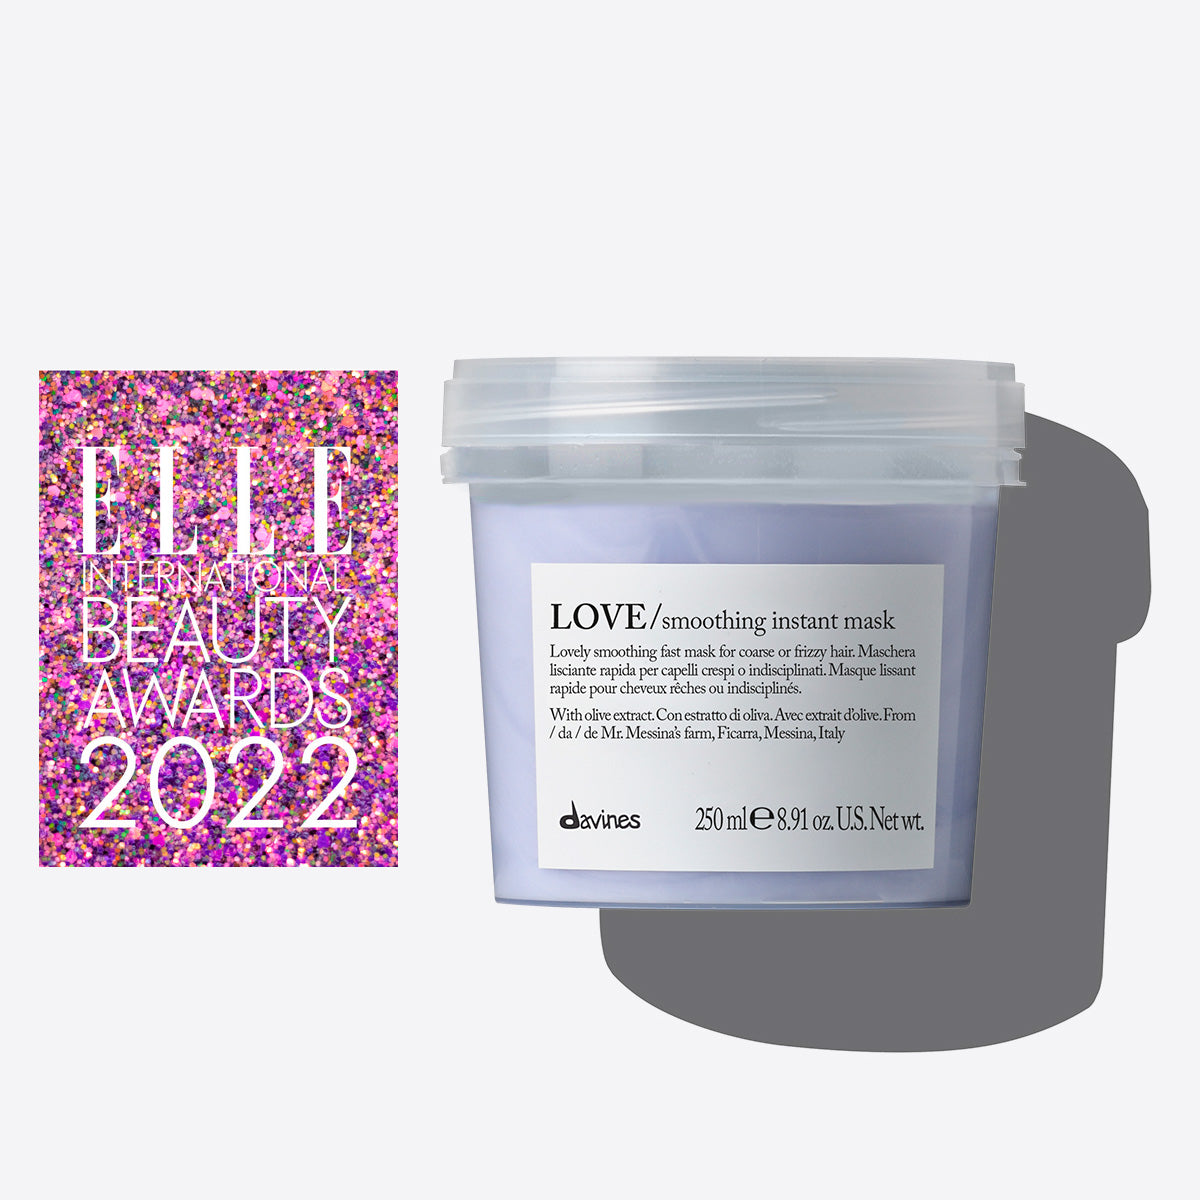 LOVE Smoothing Instant Mask 1  Davines
